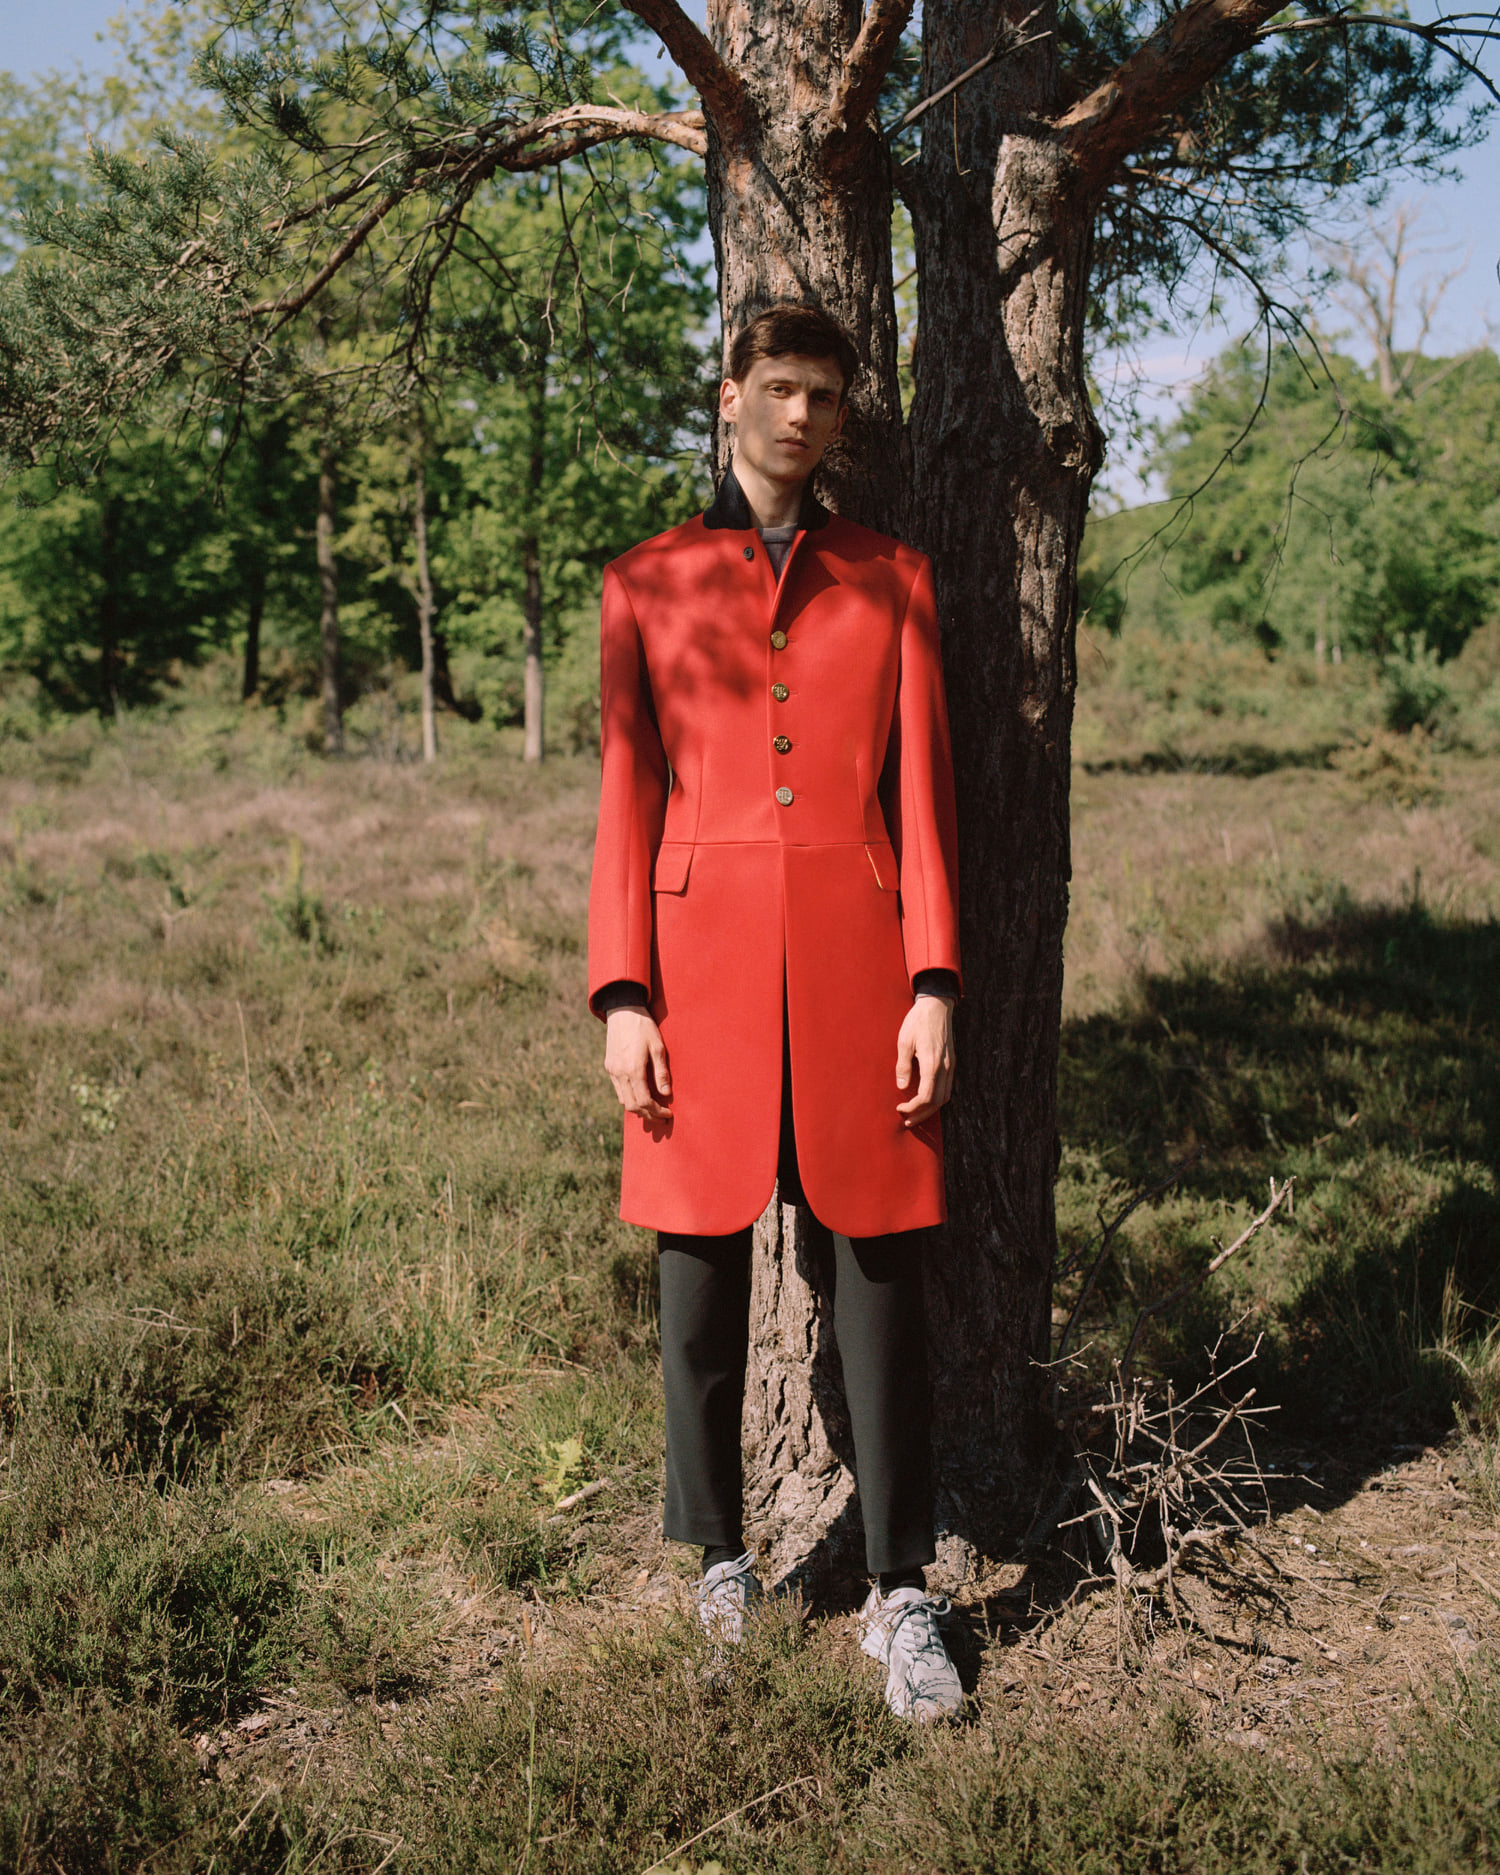 For autumn/winter ’19, inspiration from traditional British outerwear adds elegance to a host of new shapes and fabrications. Shop for him: paul-smith.co/HXWzul